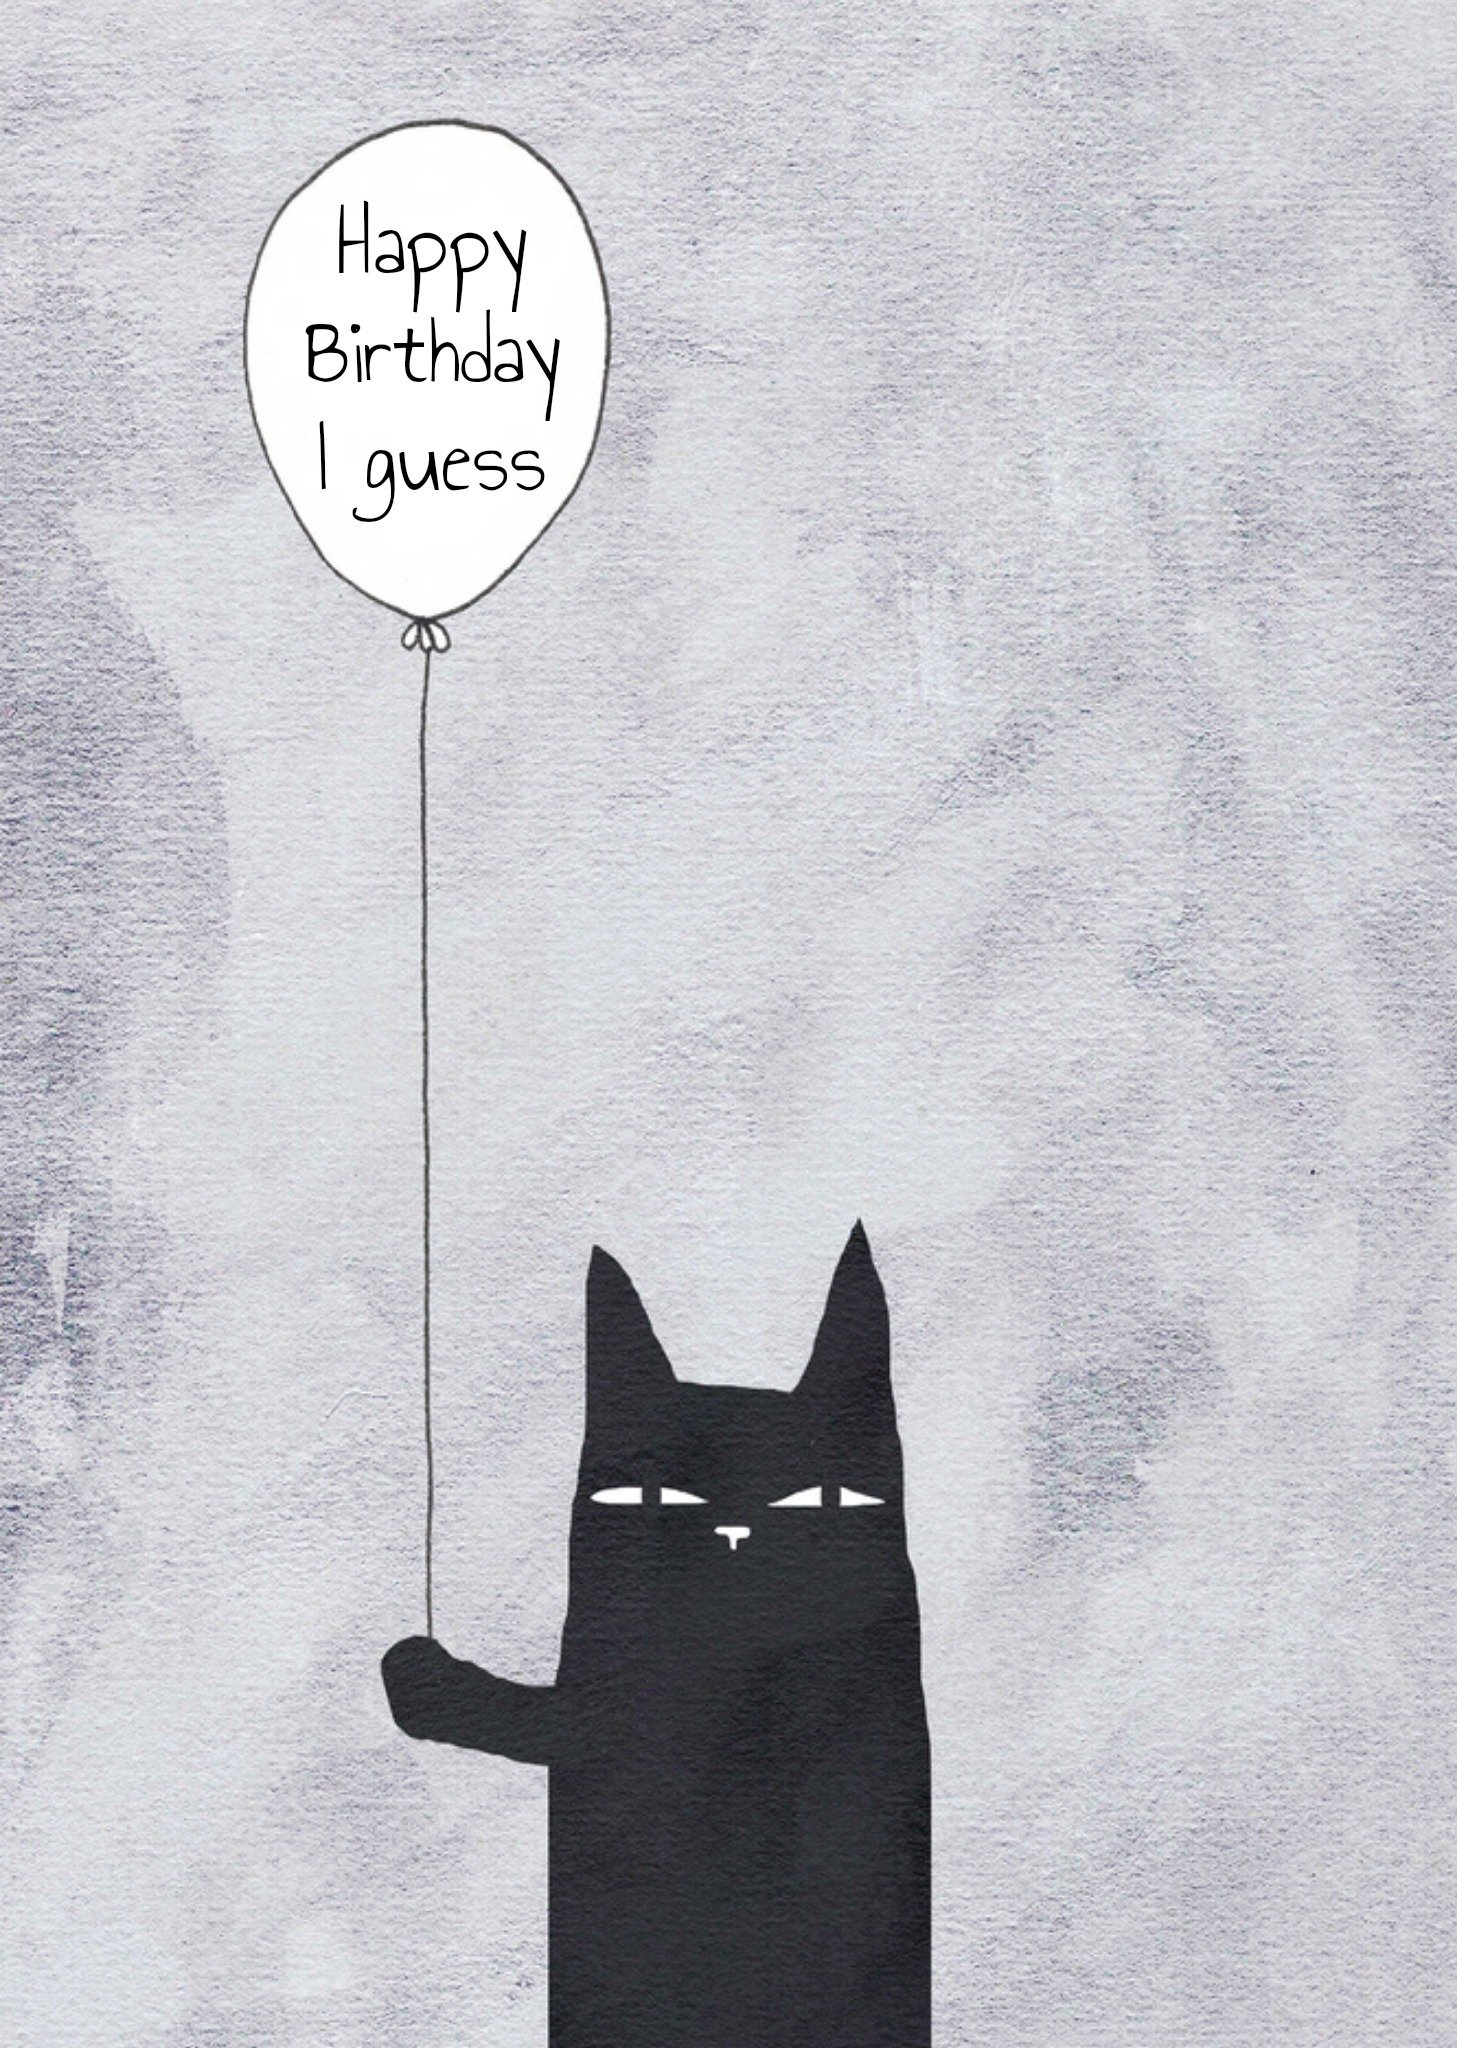 Moonpig Doomer Drawings Happy Birthday I Guess Illustrated Downer Cat With A Balloon Birthday Card, 